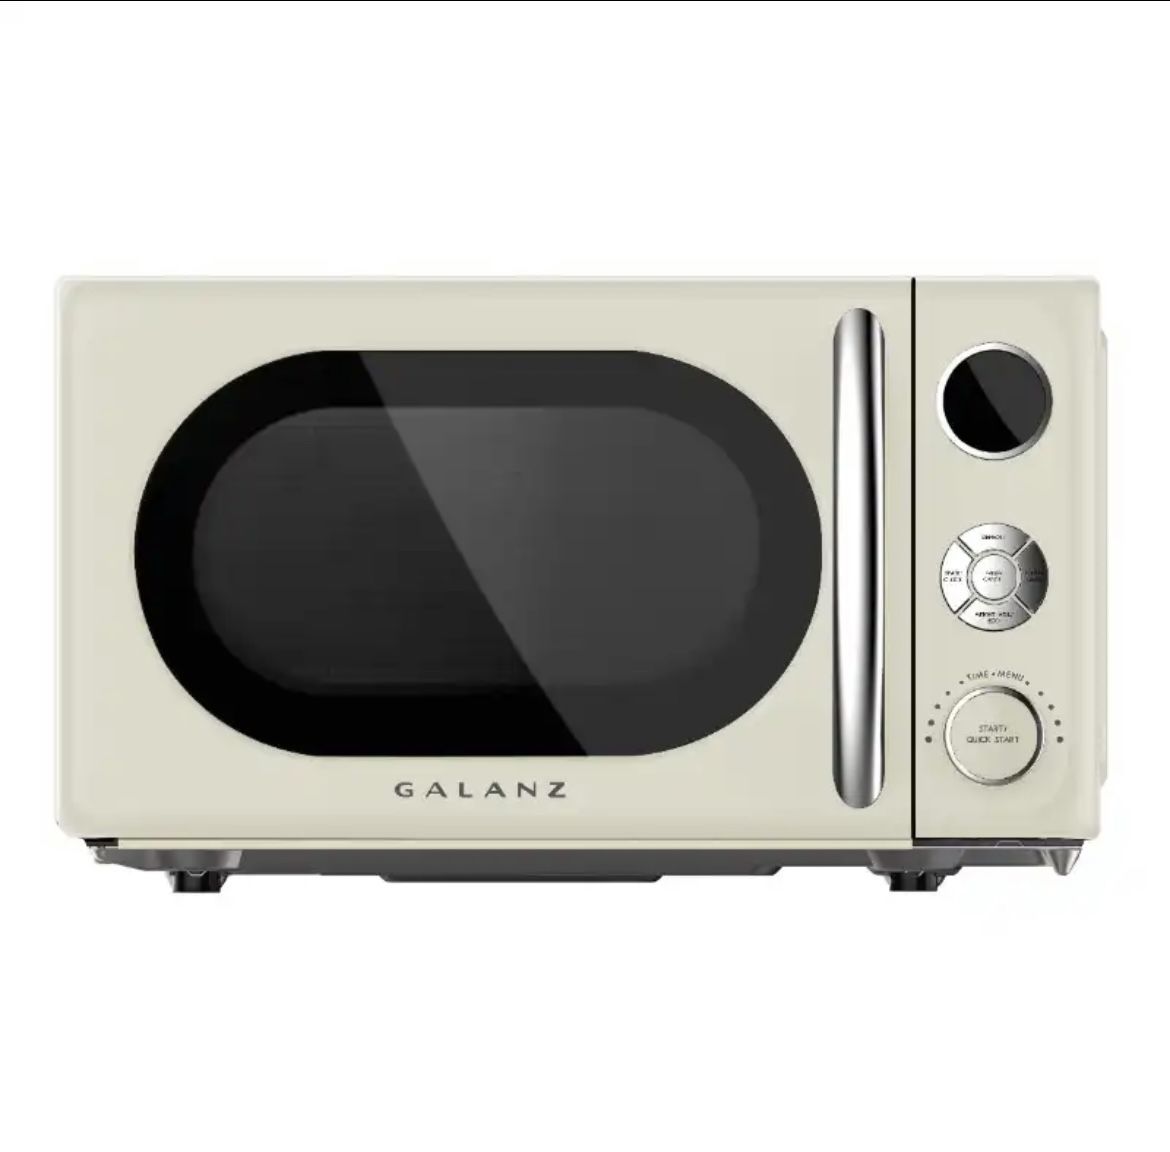 New Galanz Vintage Microwave 